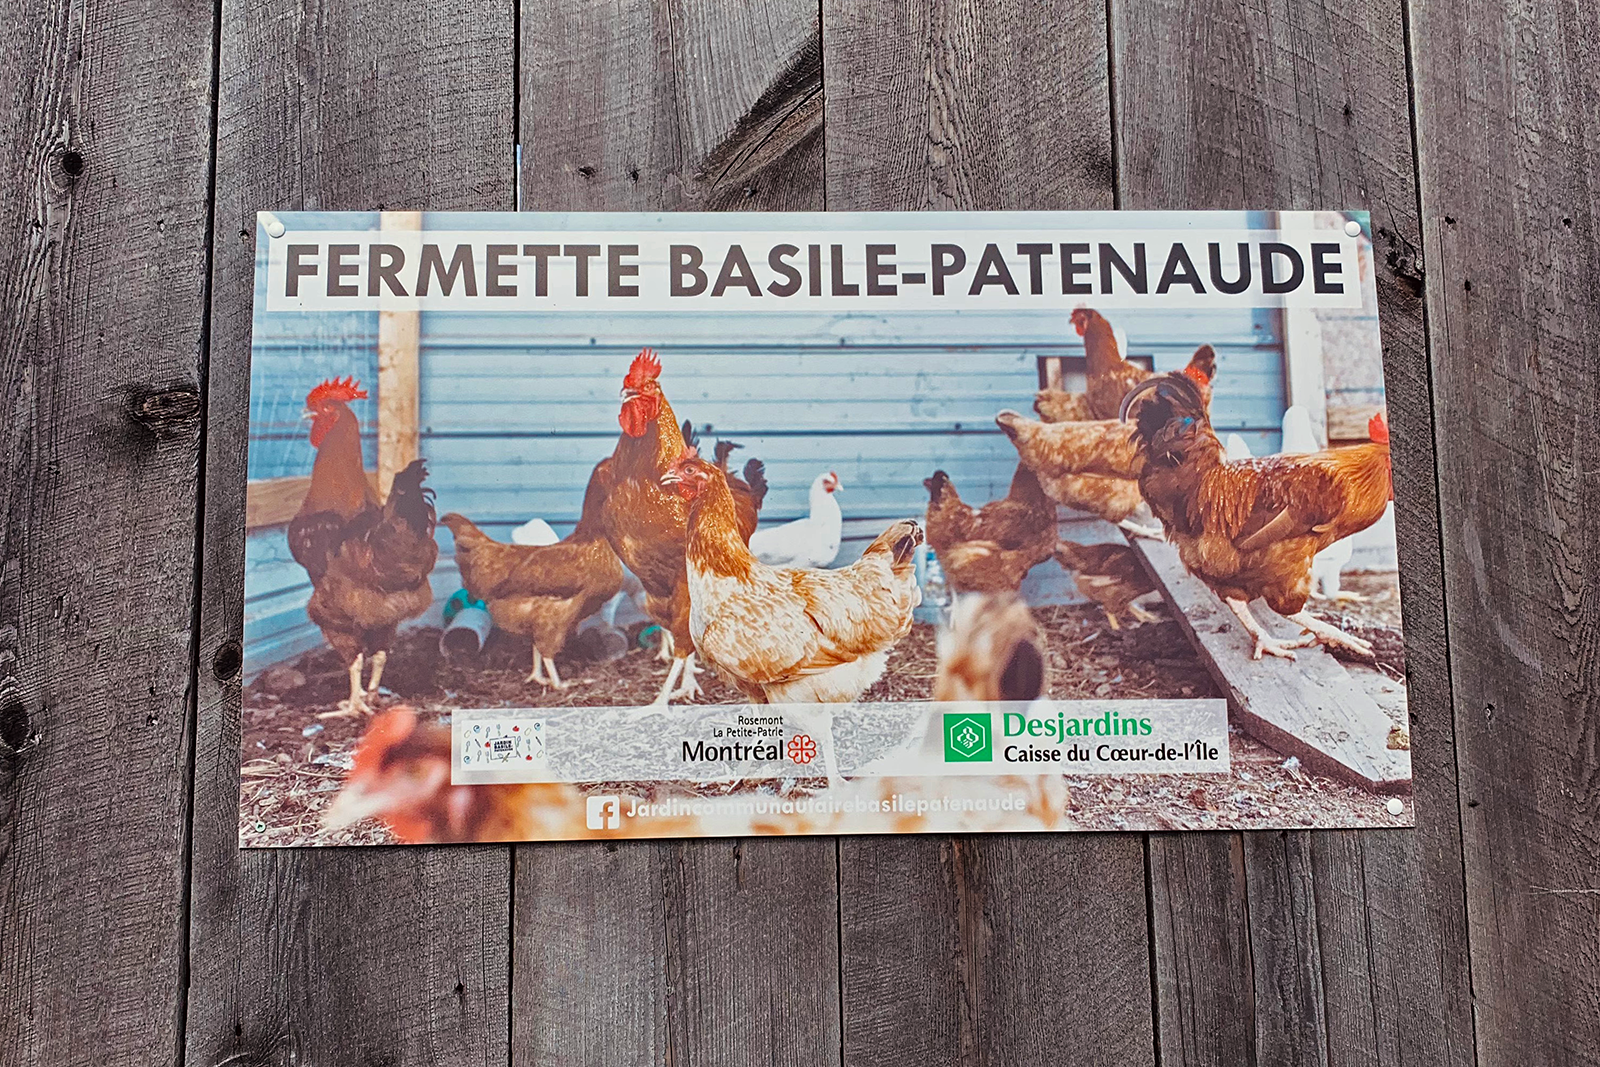 A sign for the farmhouse pasted onto a wooden surface shows several hens